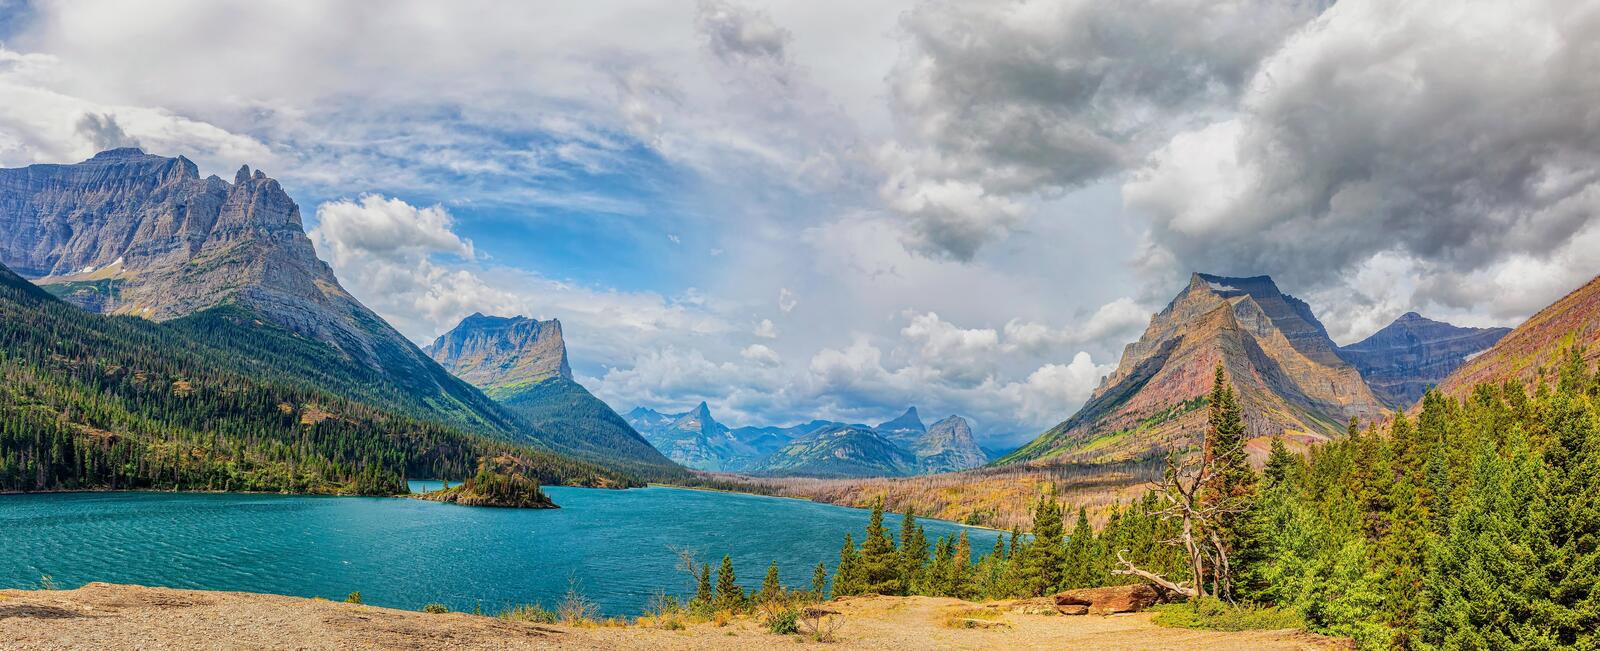 Wallpapers St Mary Lake Glacier National Park mountains on the desktop